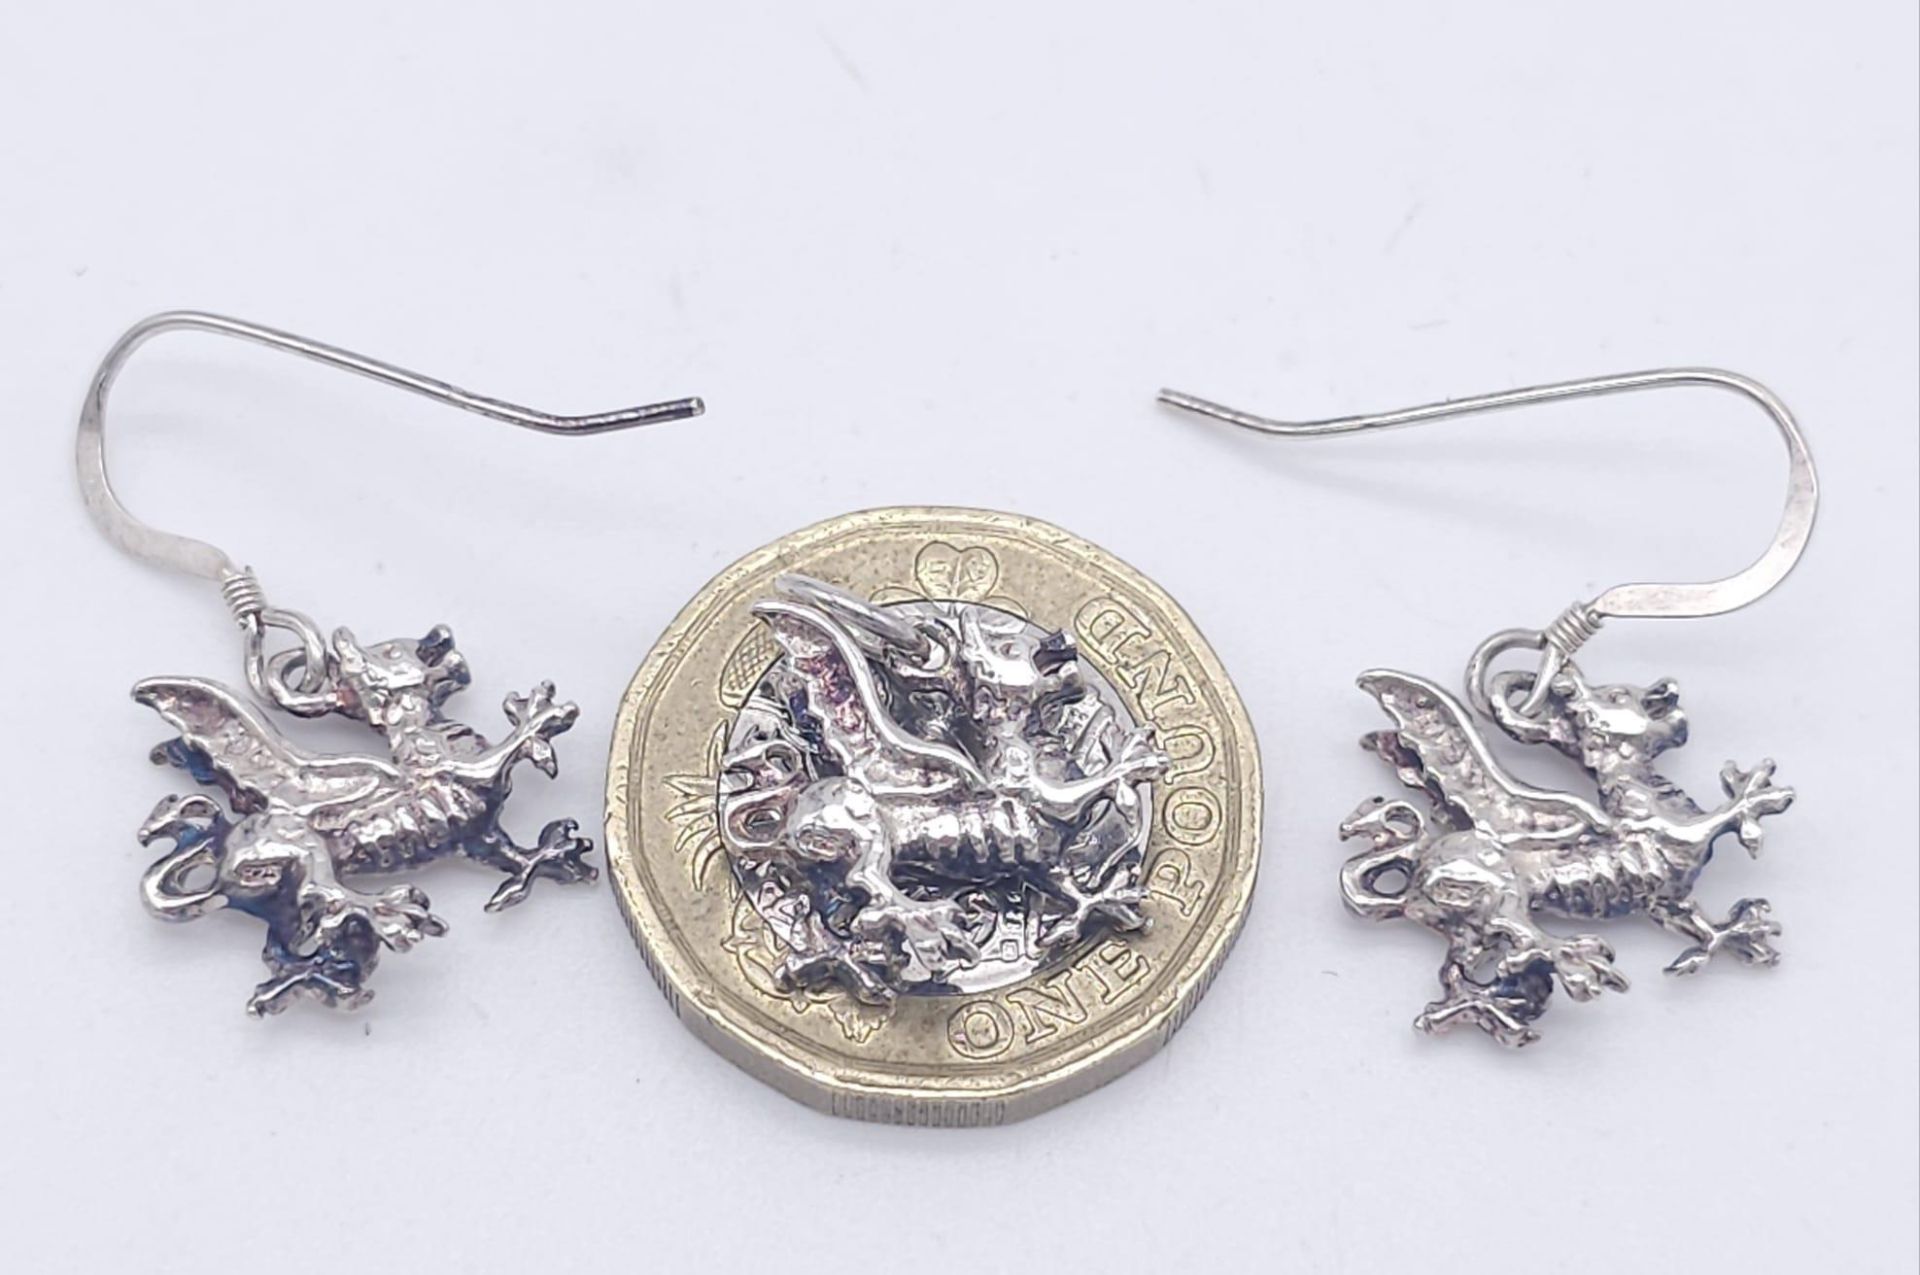 A STERLING SILVER WELSH DRAGON PAIR OF DROP EARRINGS AND MATCHING PENDANT / CHARM. 6.5G - Image 6 of 6